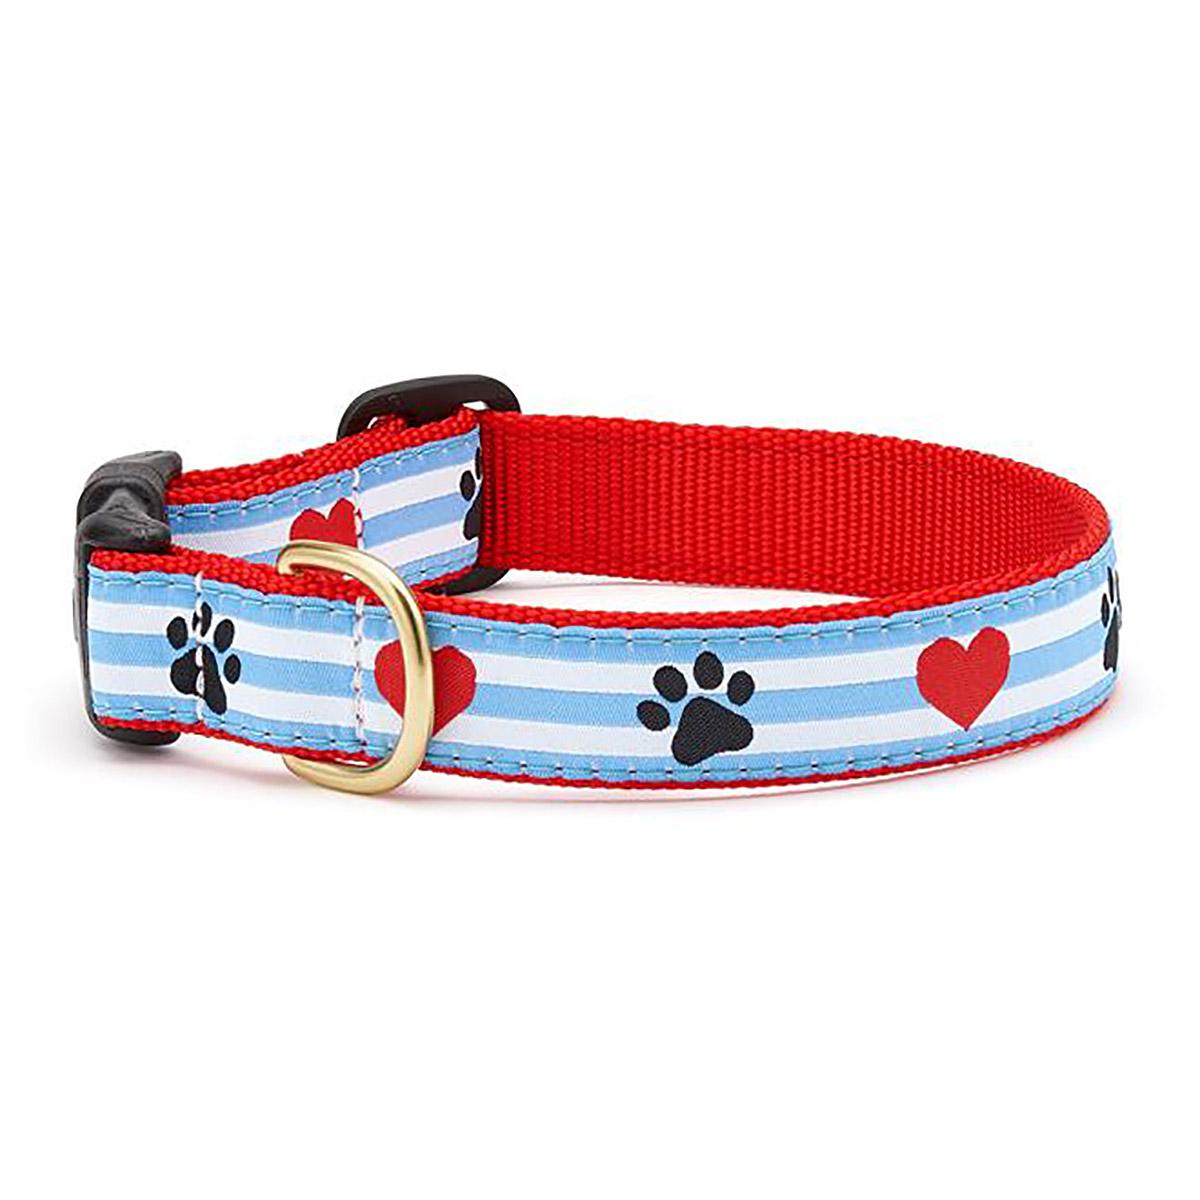 Pawprint Stripe Dog Collar by Up Country